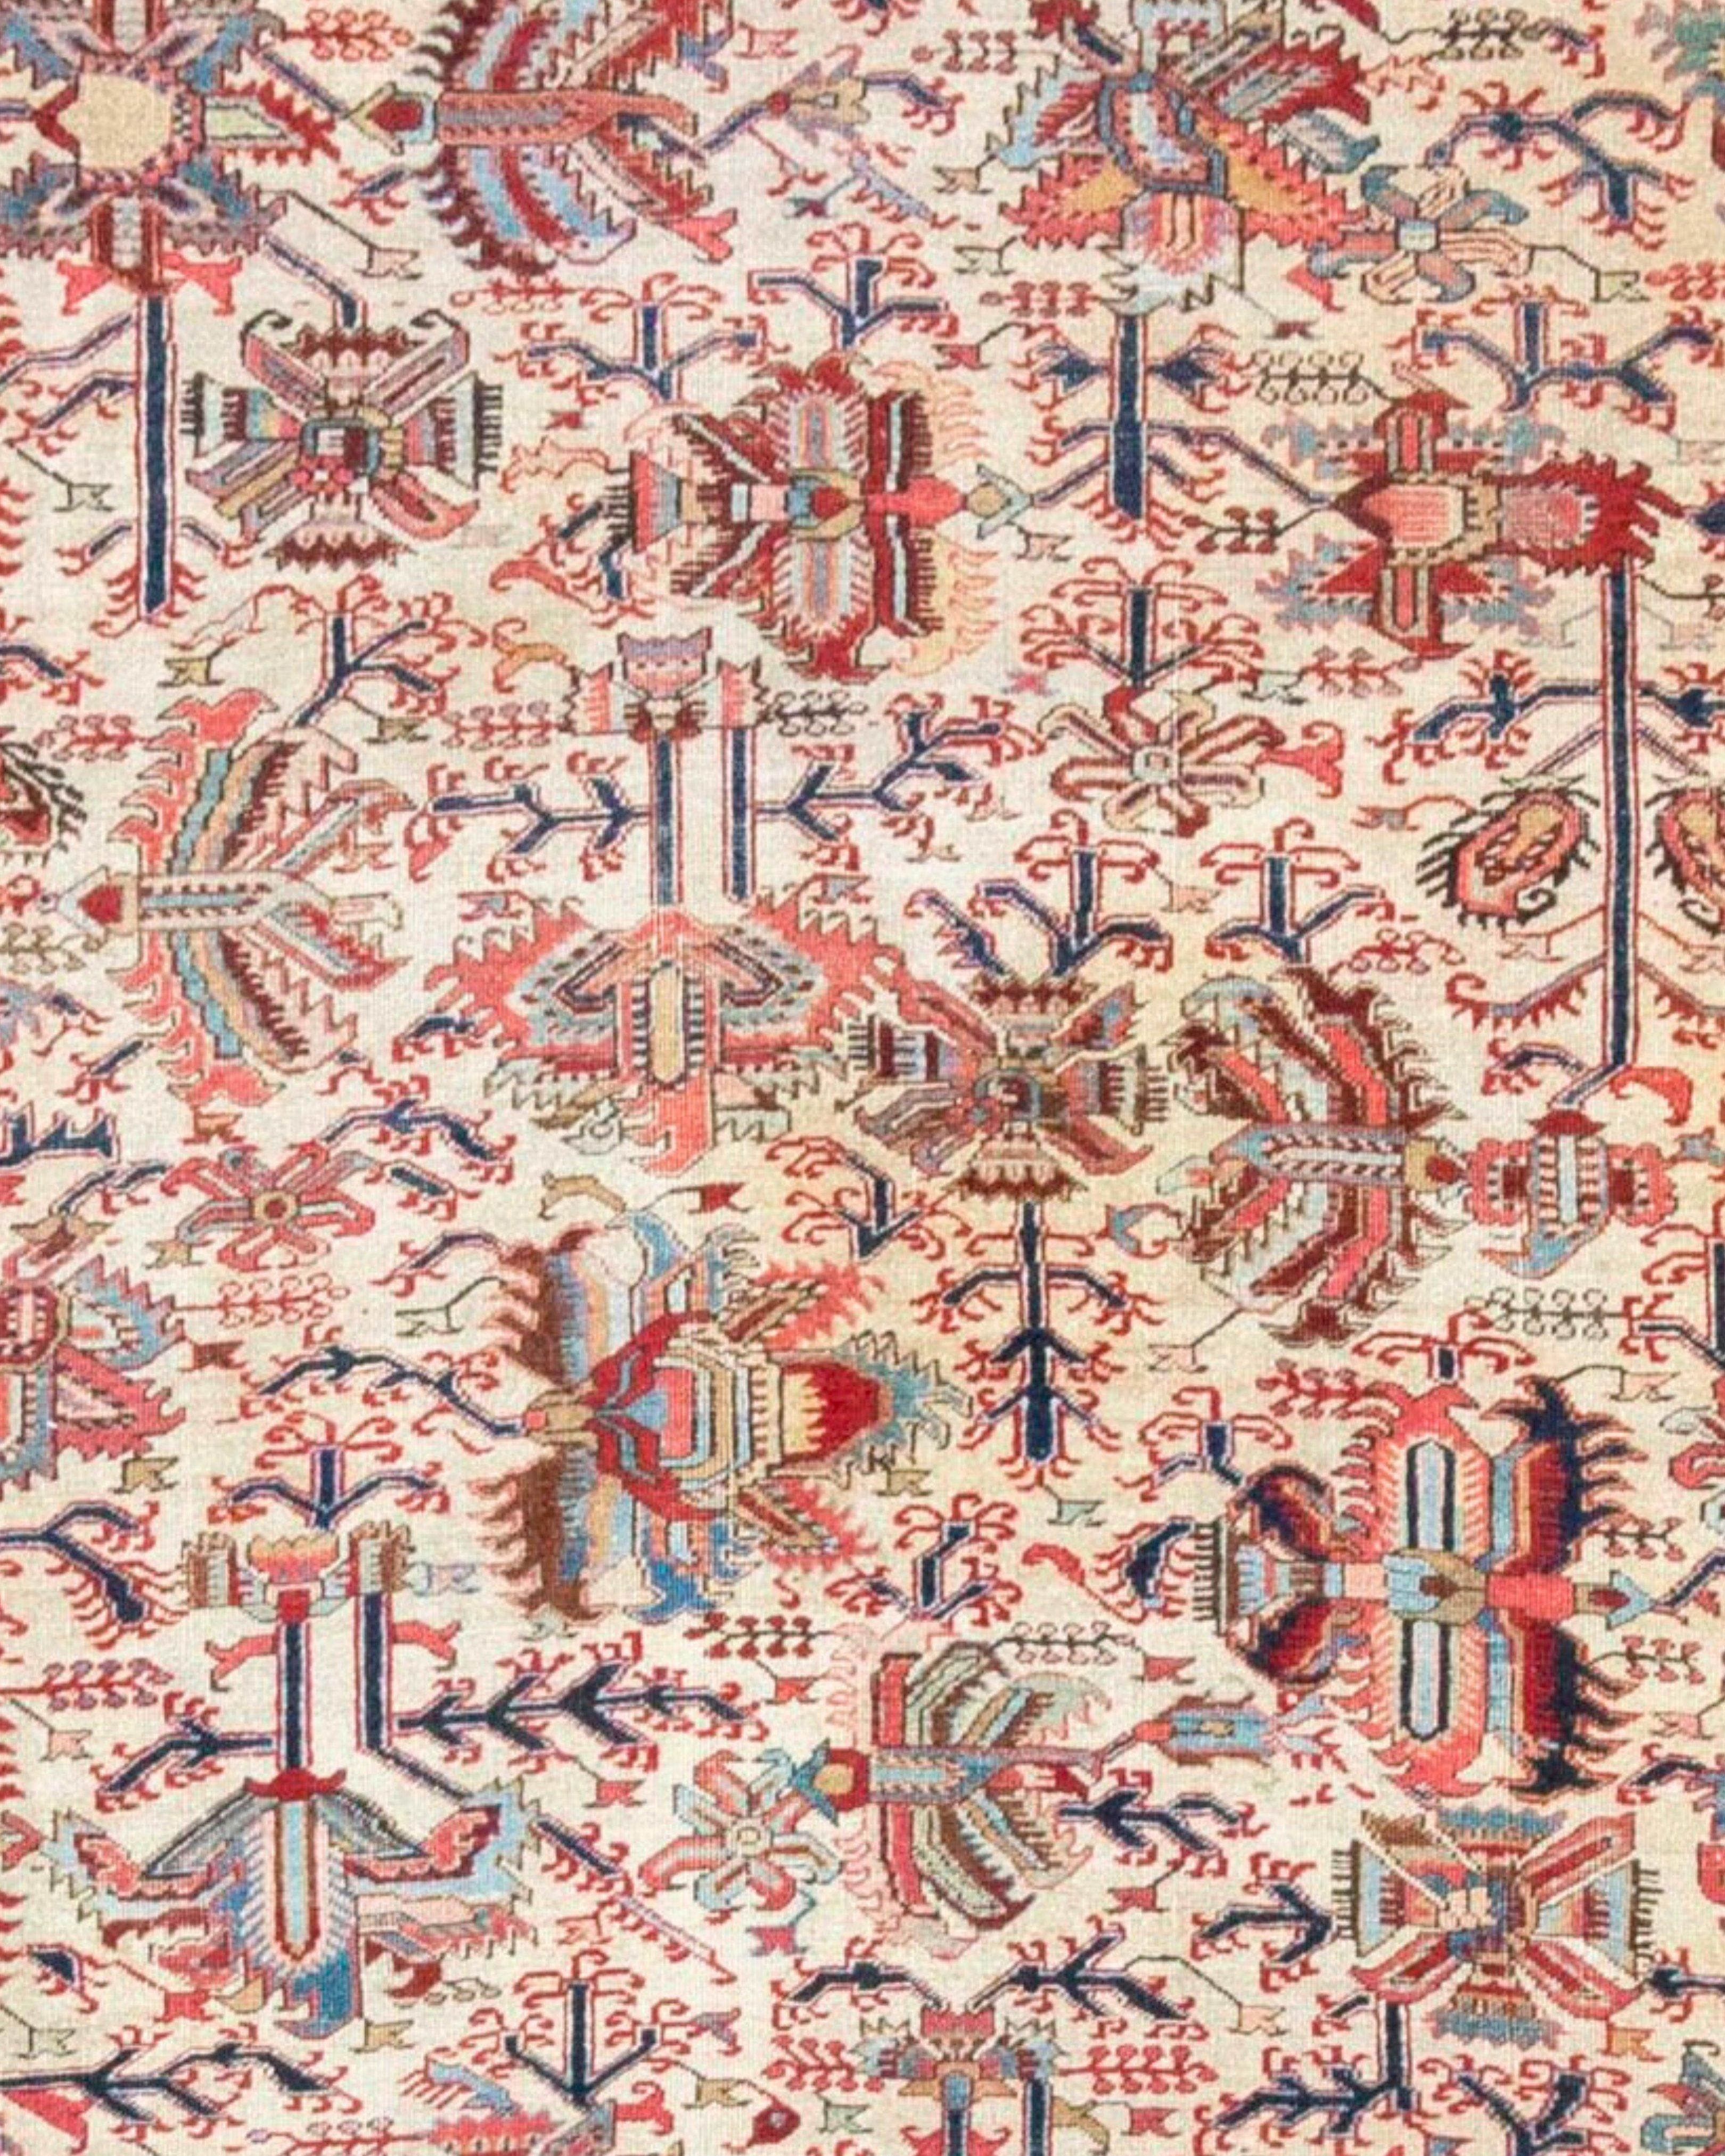 Antique Persian Heriz Rug, 19th Century

Heriz rugs and carpets were woven in Northwest Persia starting in the mid 19th century in response to a great increase in demand for rugs internationally. Prior to that, there were not rugs woven (in Persia)